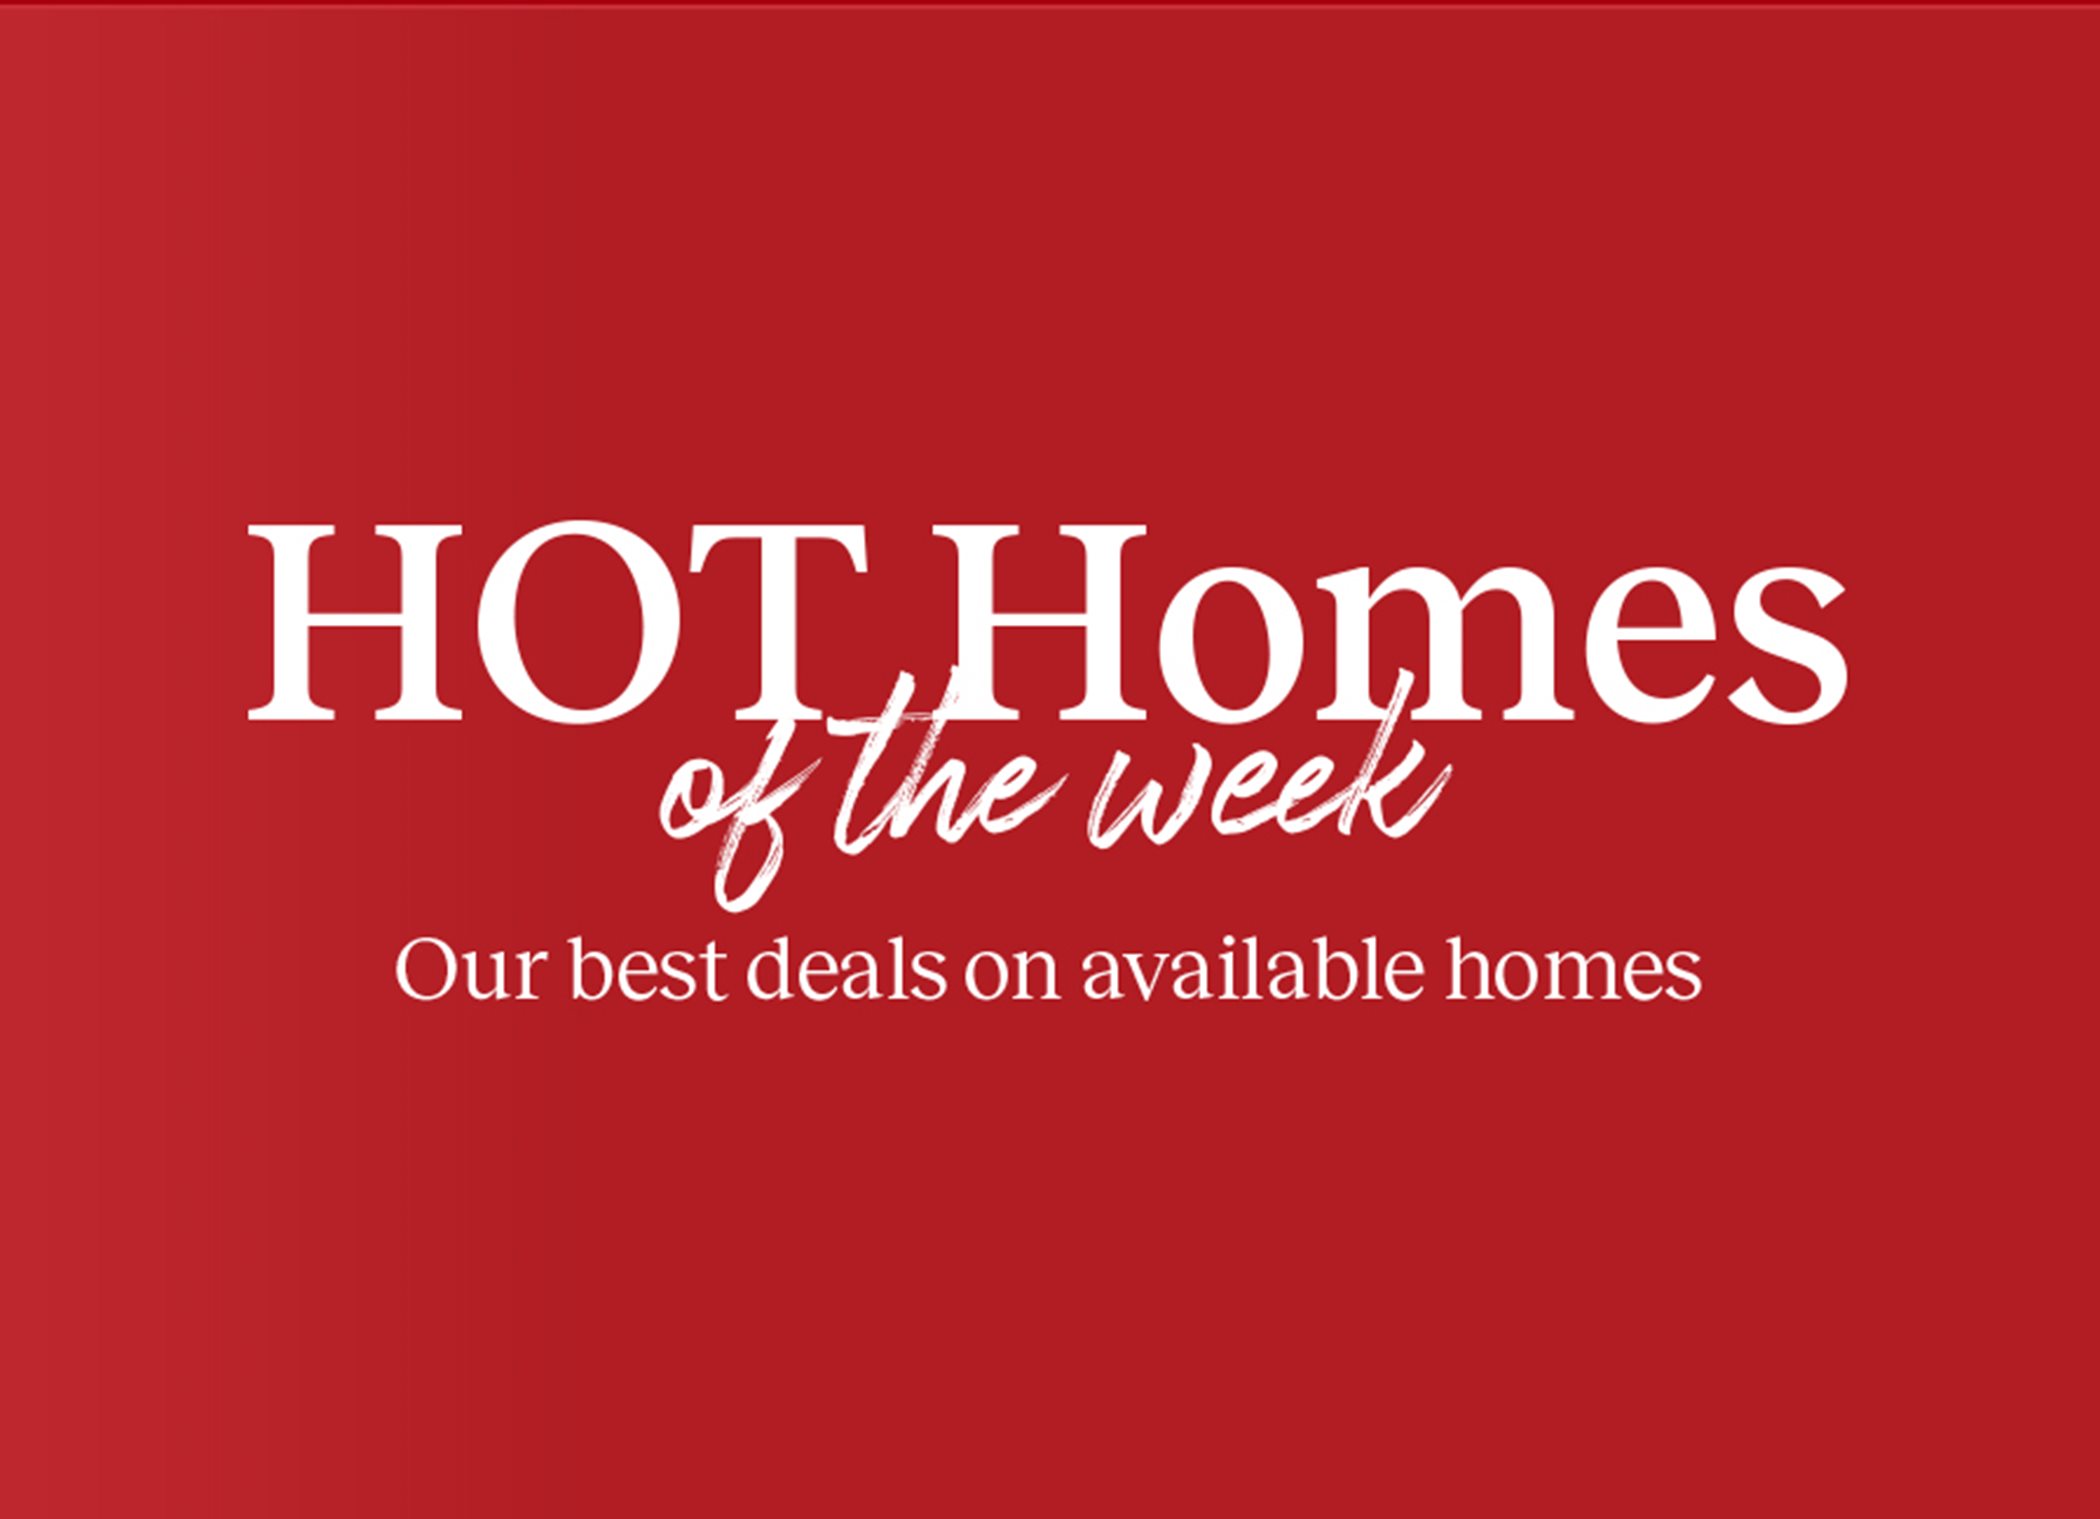 TEXT: Hot Homes of the Week - Our best deals on available homes